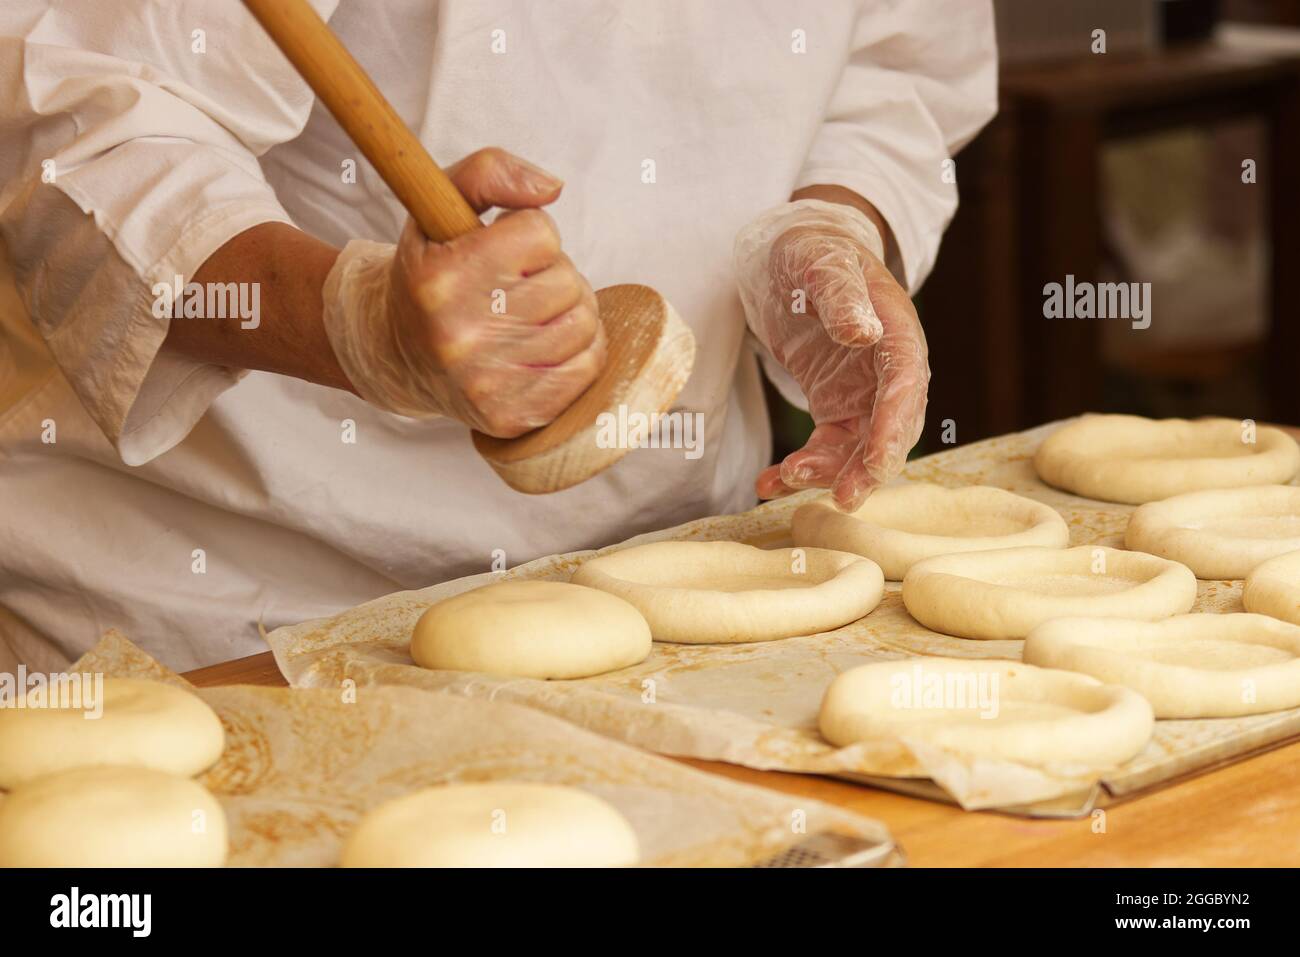 The woman in the picture is making stuffed pies. Hands in protective gloves holding the tool press dough to get the proper shape of pie. Work in the b Stock Photo